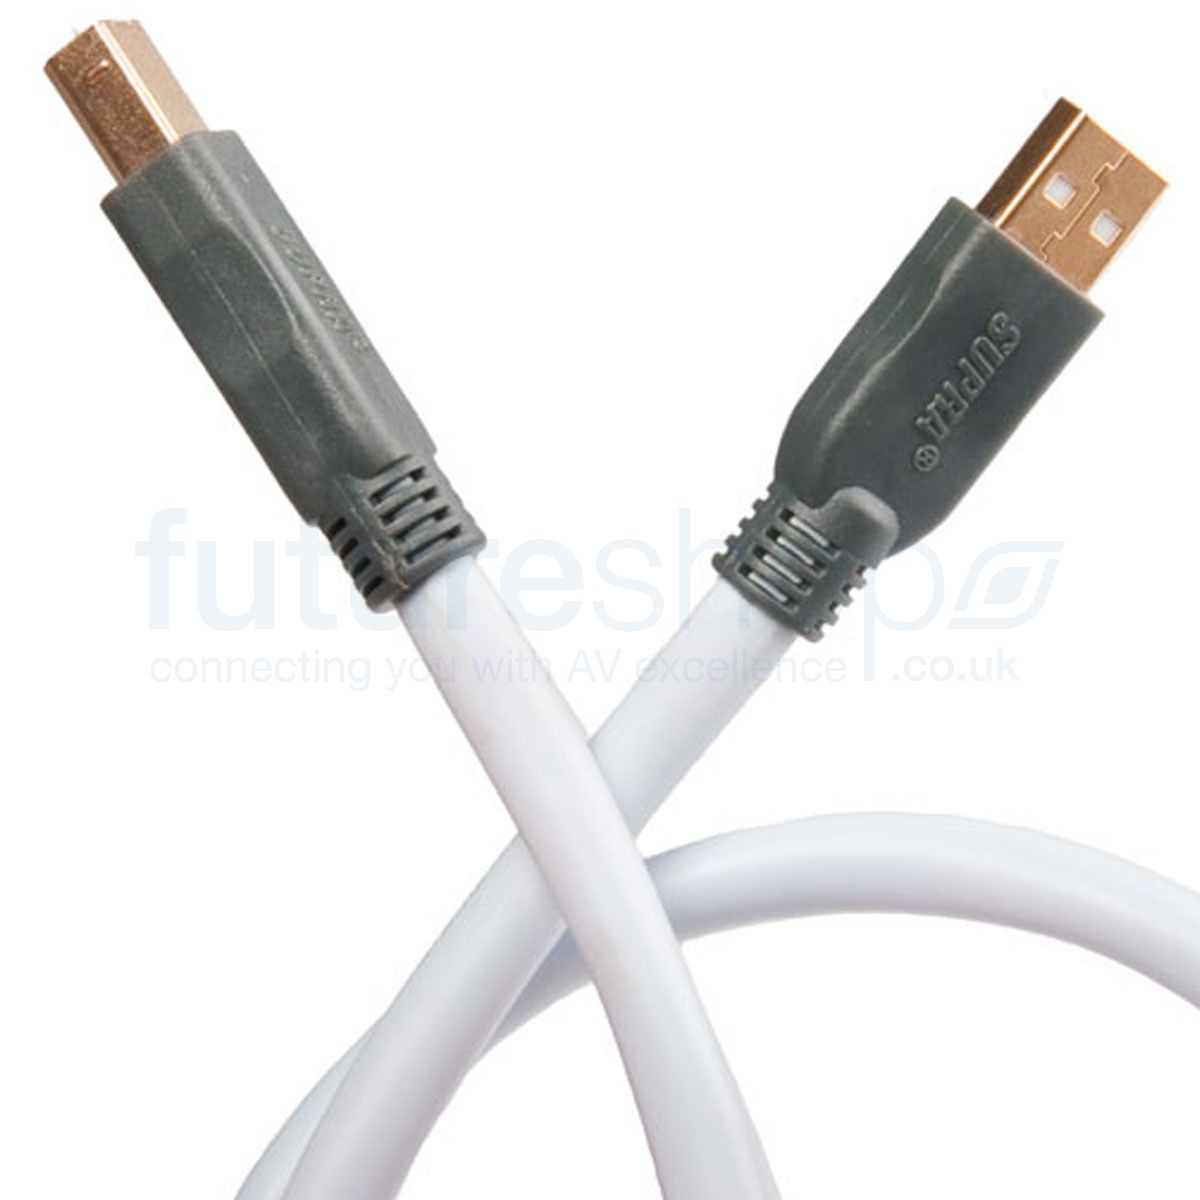 Supra Usb 2 0 Type A To Type B Cable Future Shop